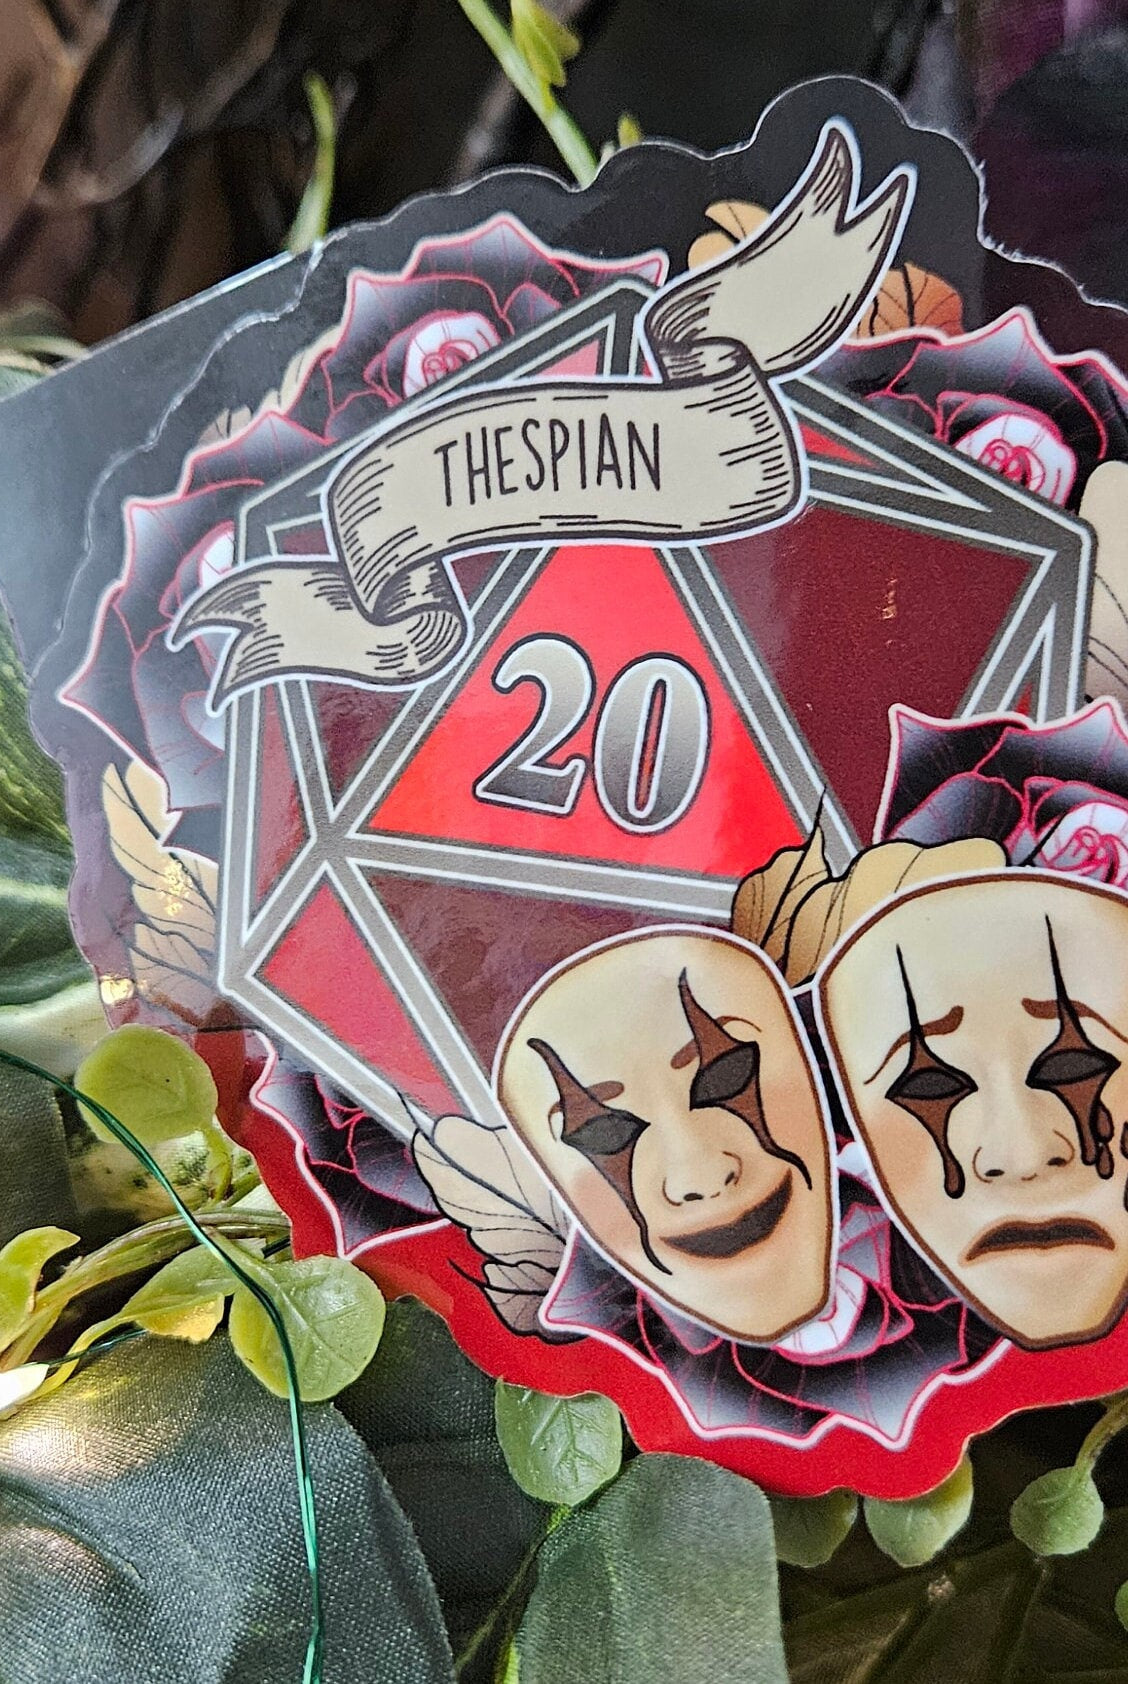 GLOSSY STICKER: D20 The Thespian , Floral D20 Sticker , Floral D20 Stickers, D20 Sticker , D20 Thespian Sticker , Player Type D20